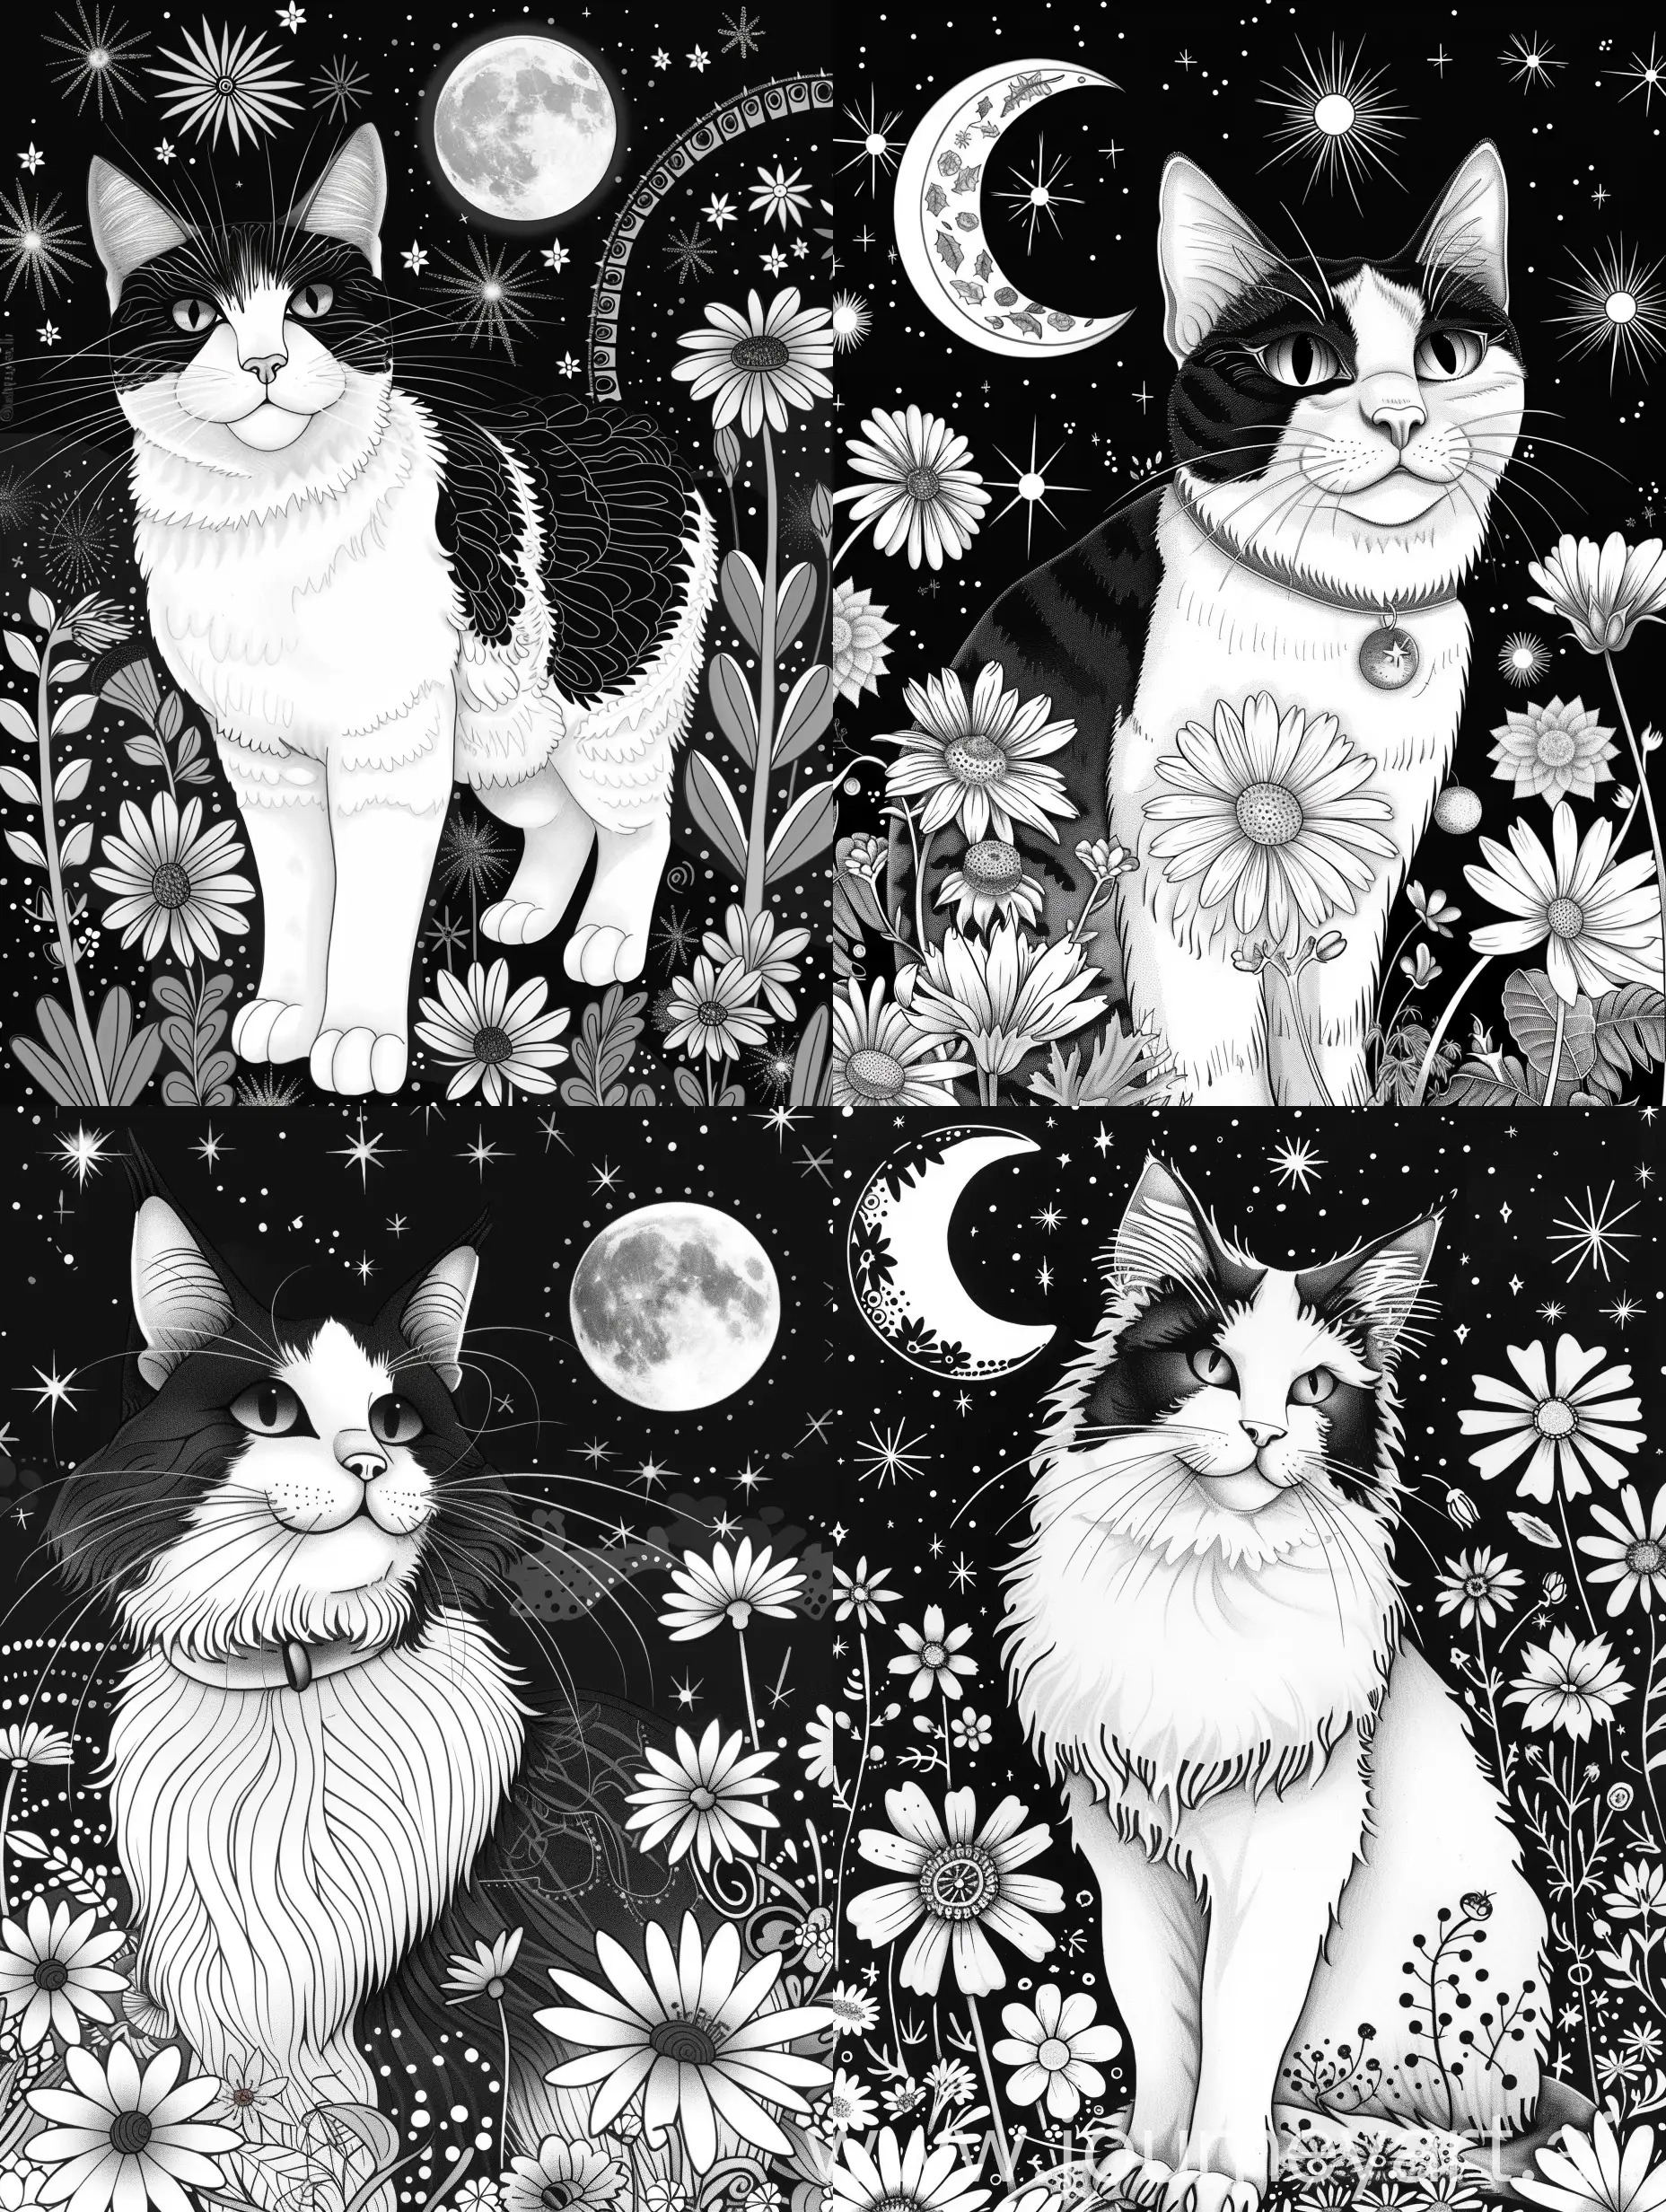 Black and white cat with bright night moon amidst flowers and stars in the sky with distinctive eyes 